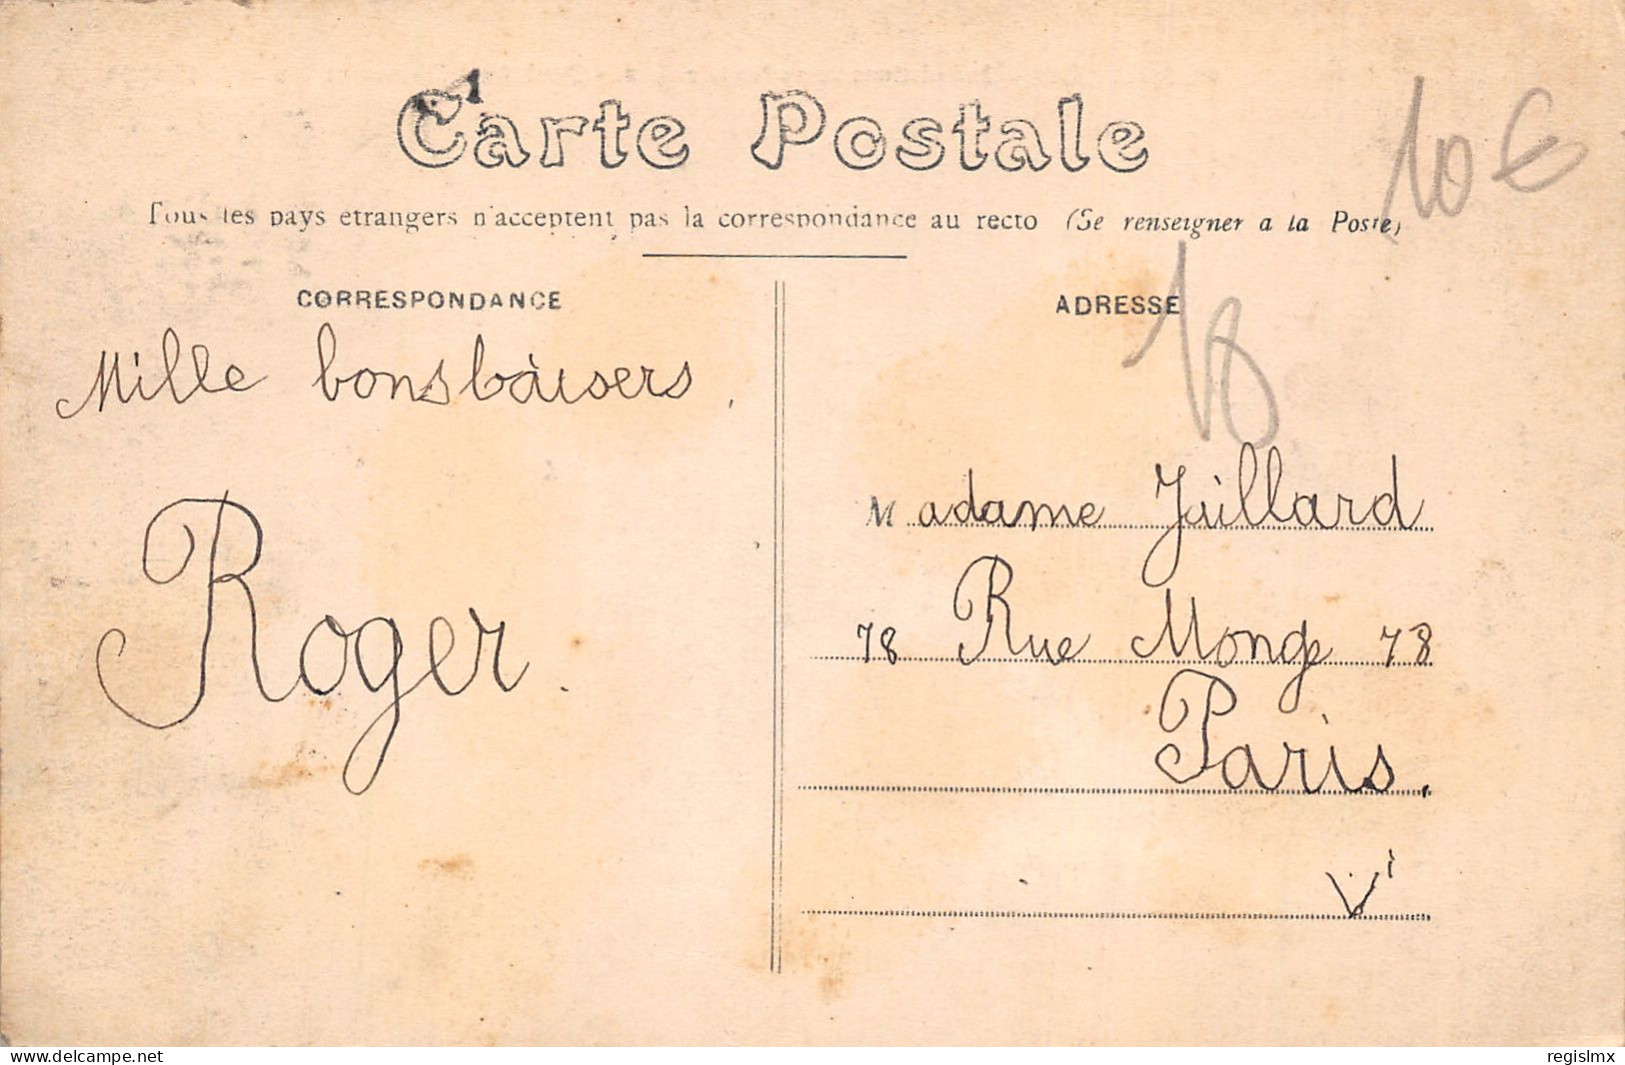 18-BOURGES-INODATIONS BOULEVARD D AURON-N°2041-C/0351 - Bourges